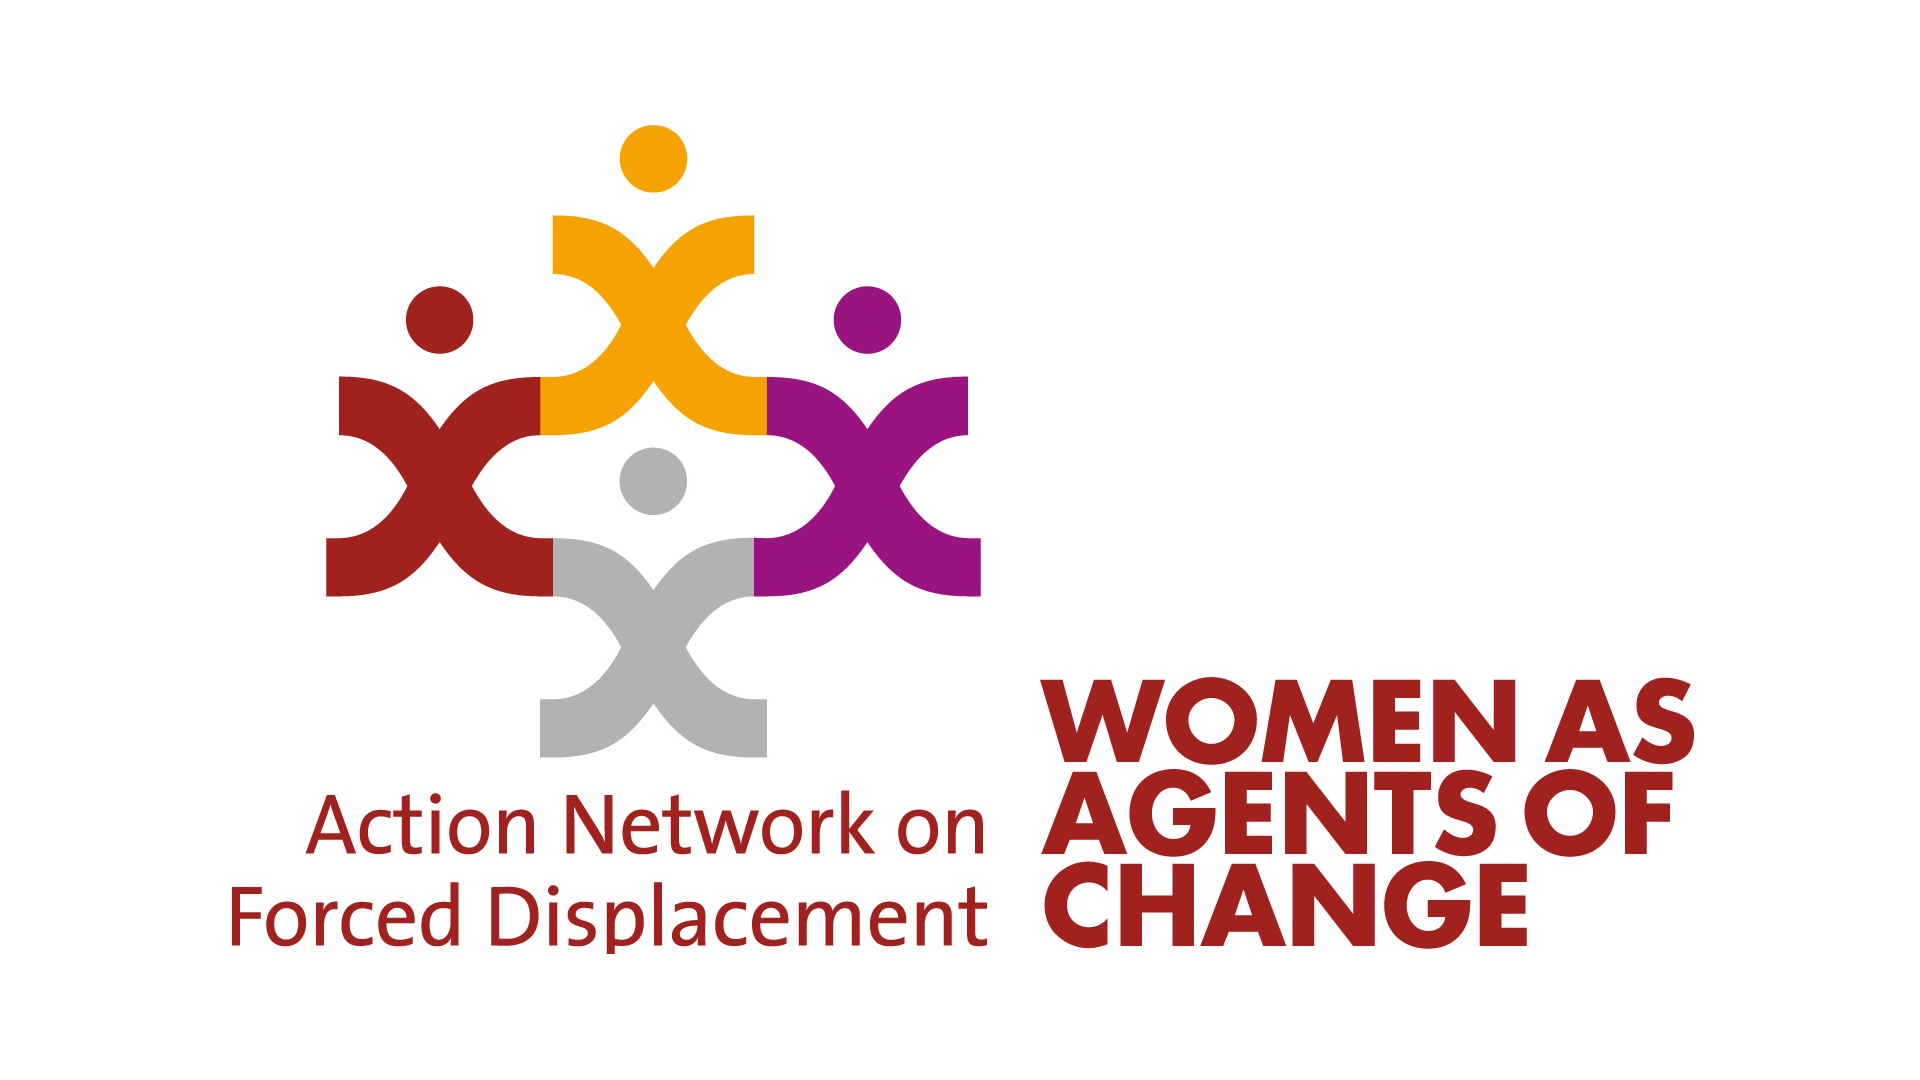 Logo: Action Network on Forced Displacement – Women as Agents of Change